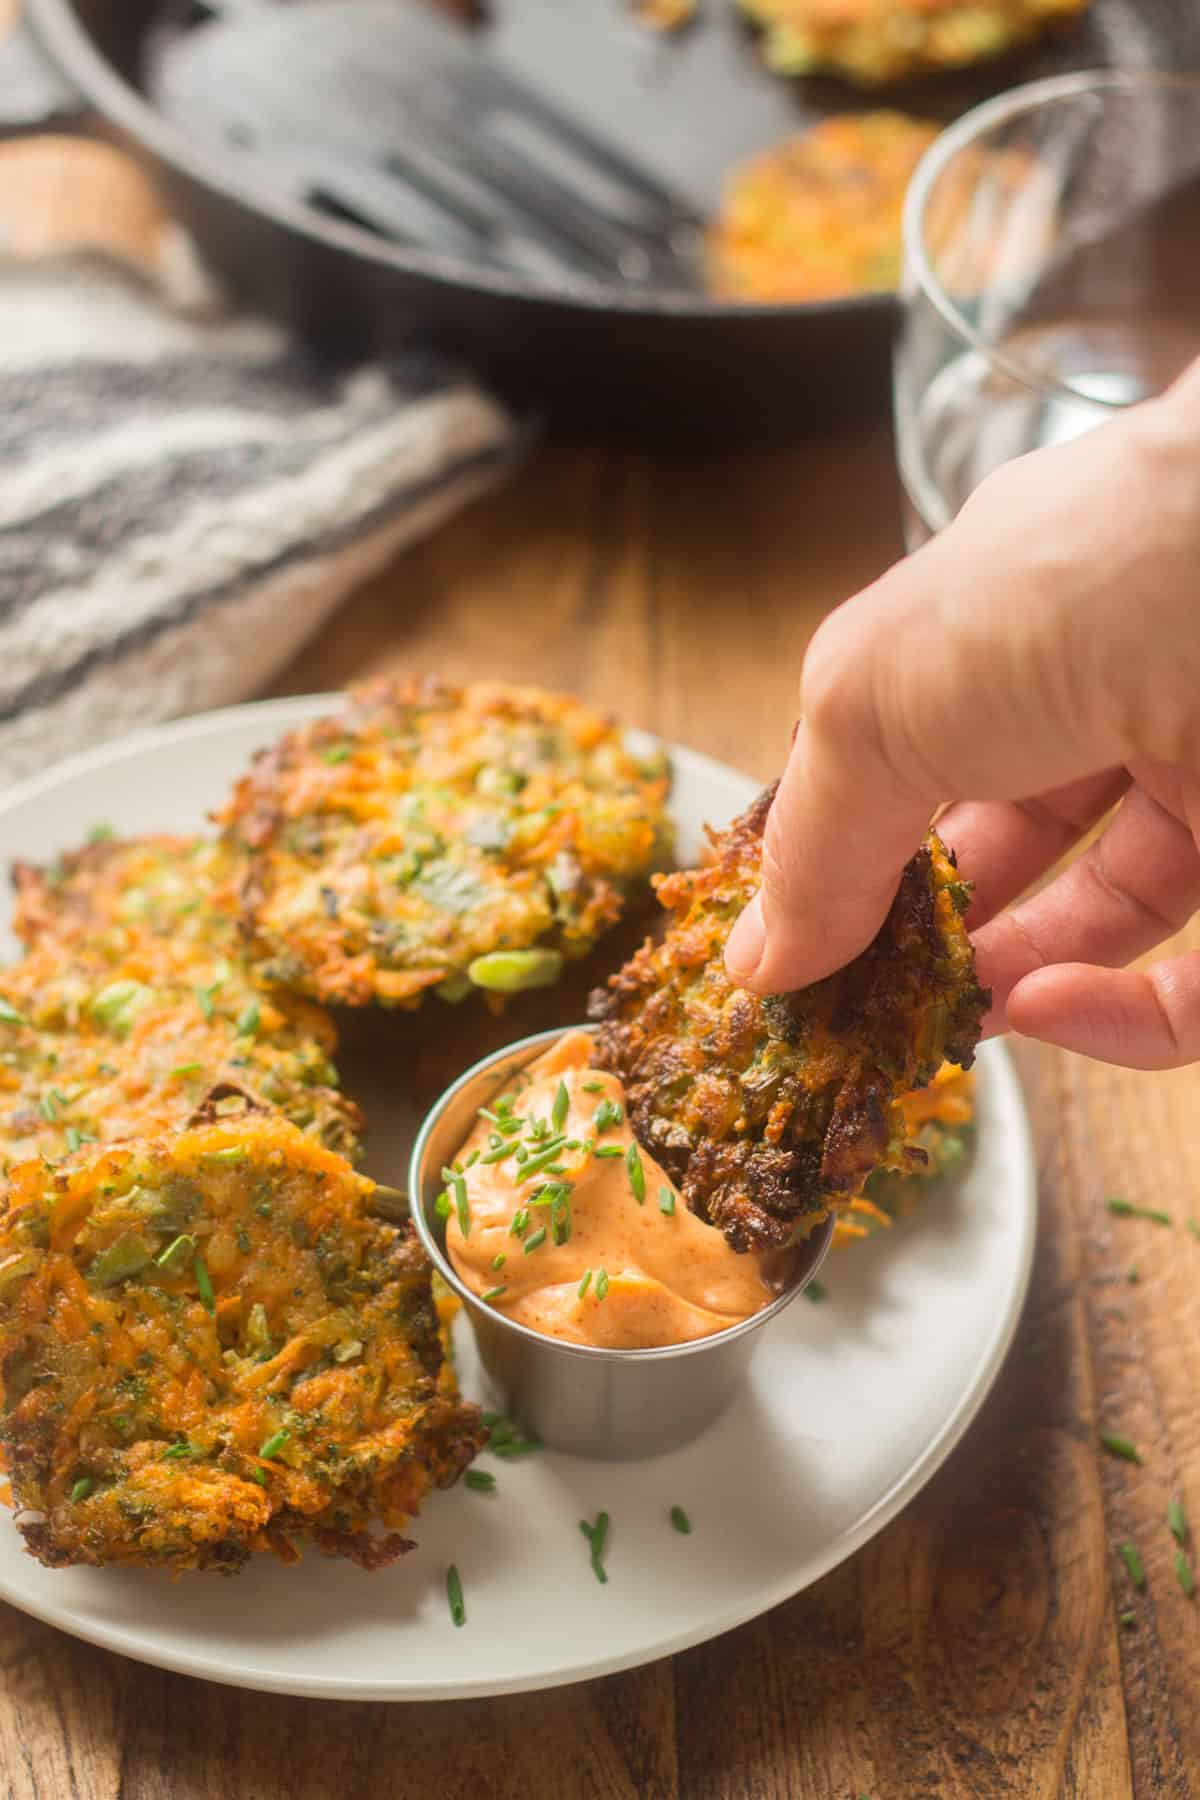 Hand dipping a Vegetable Fritter in a dish of chipotle mayo.